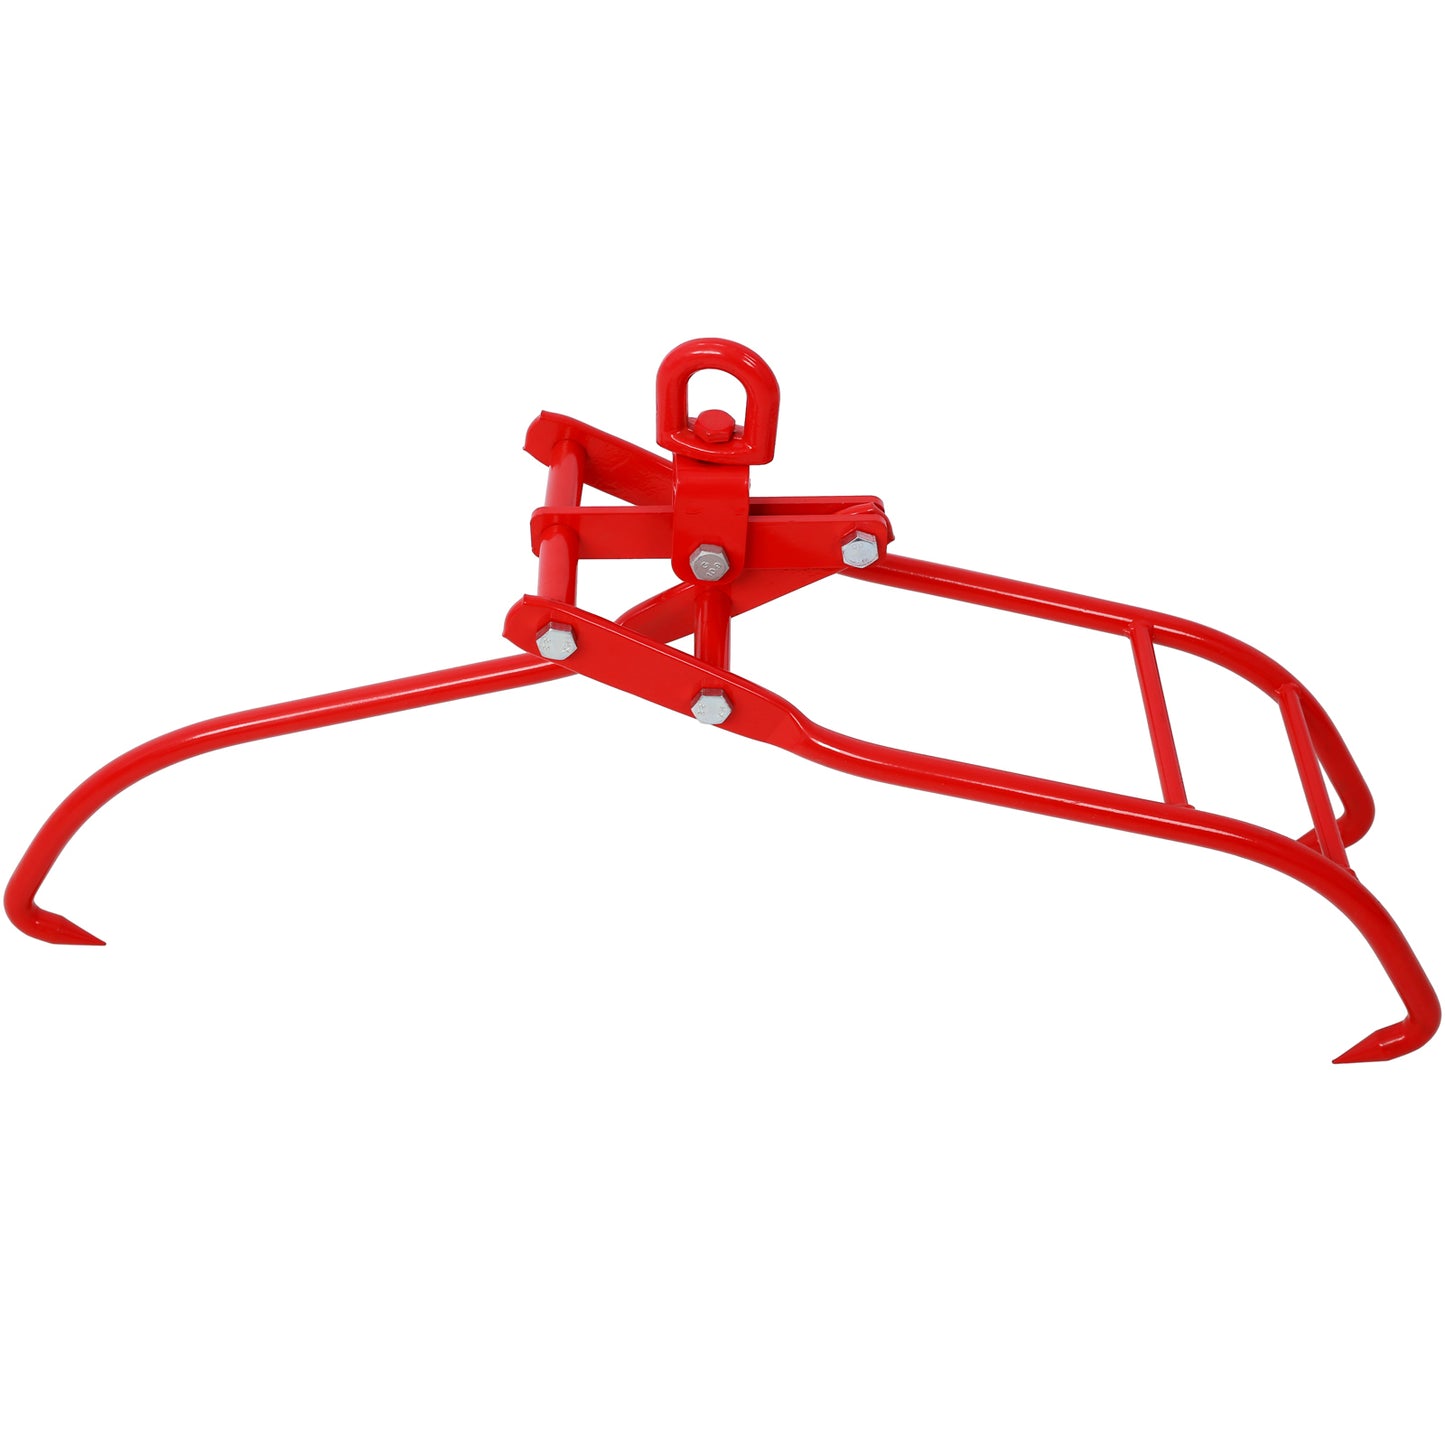 36in 3 Claw Log Grapple for Logging Tongs, Eagle Claws Design Log Lifting Tongs Log Grabs, Timber Lifting Tongs for Truck, ATV, Tractor and Skidder